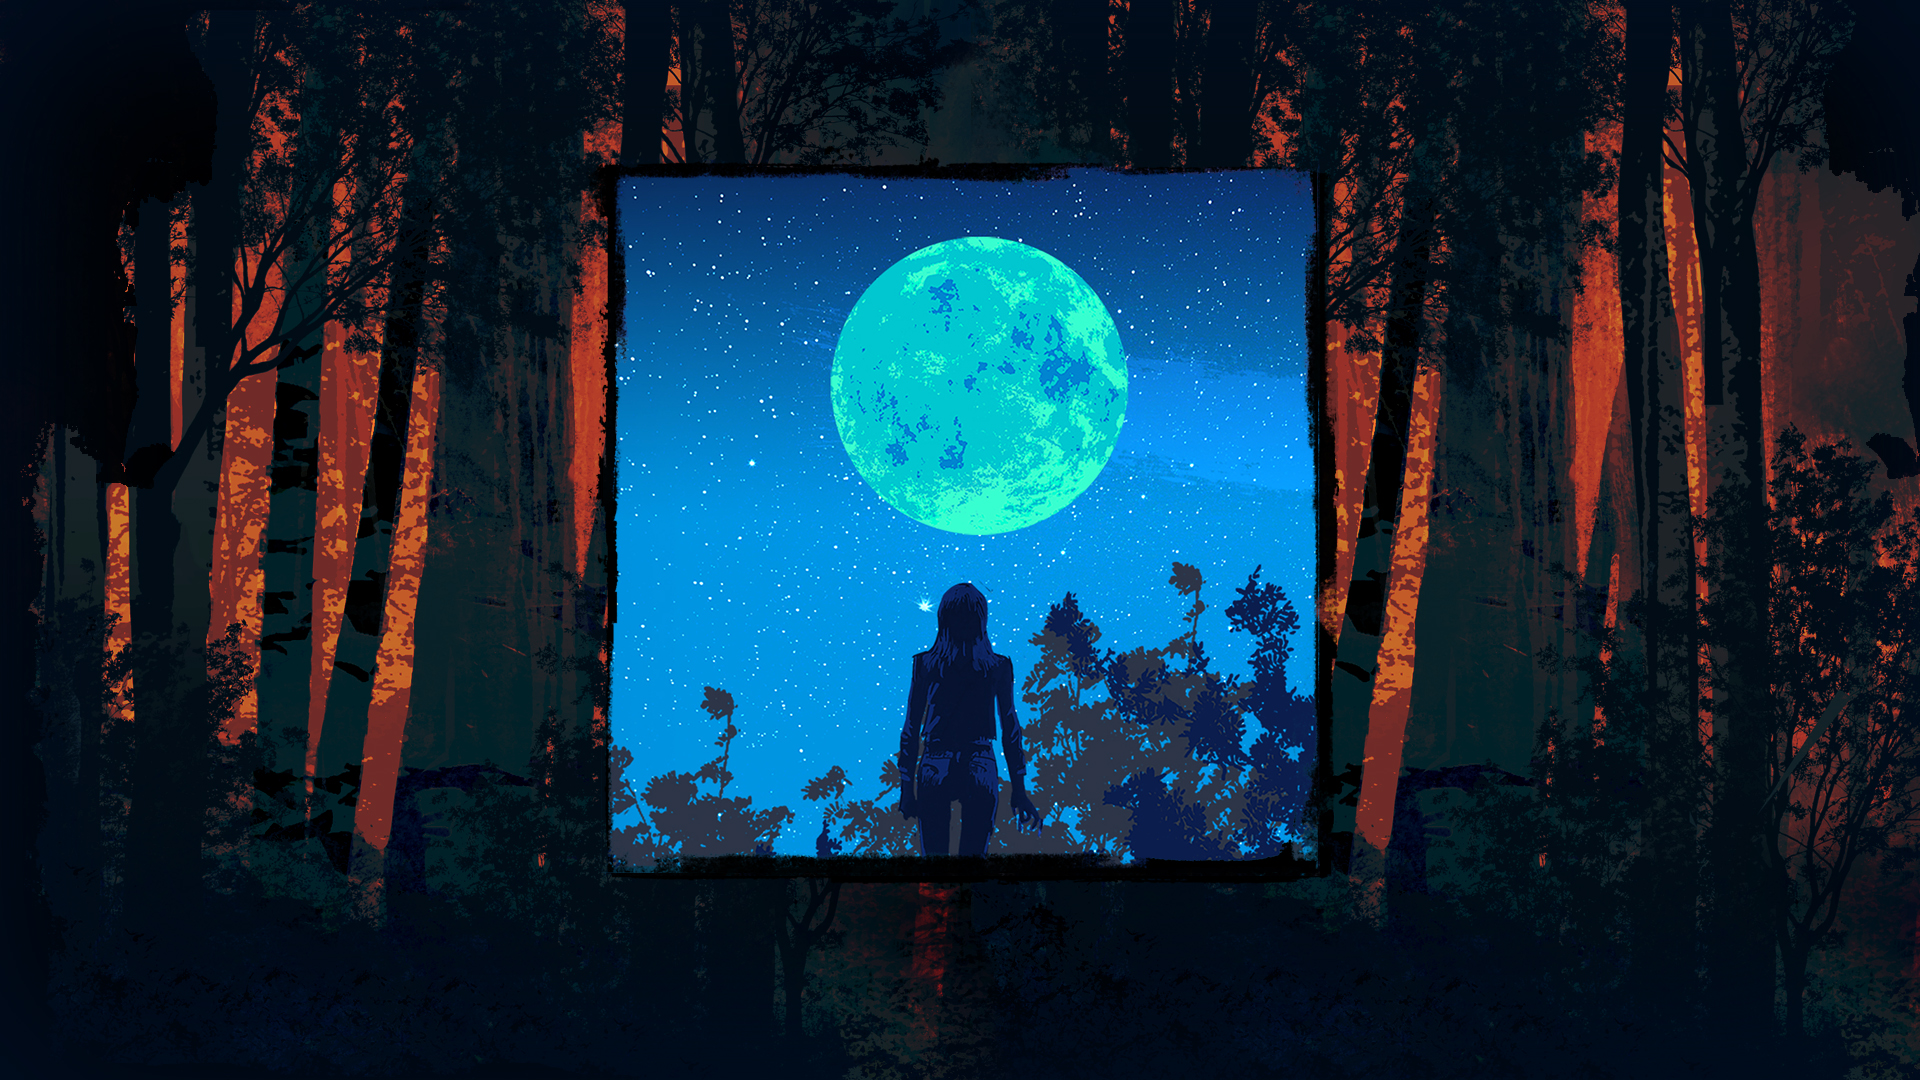 Icon for Full Moon